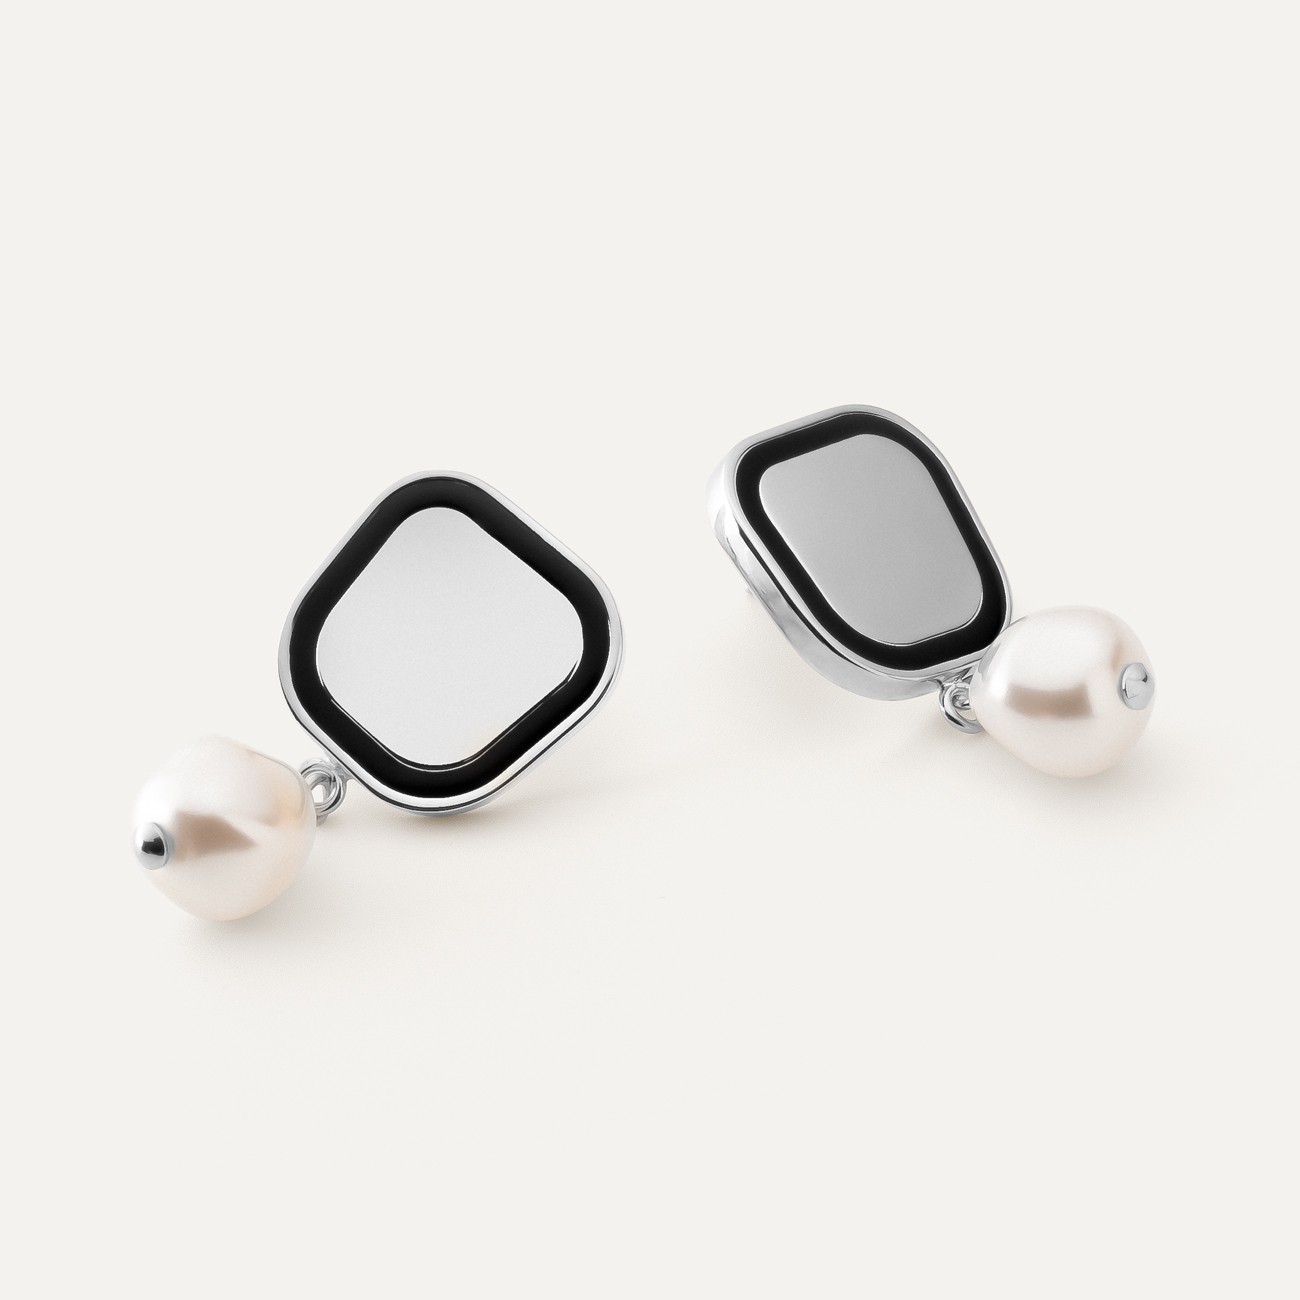 Square earrings with black resin and pearl, sterling silver 925